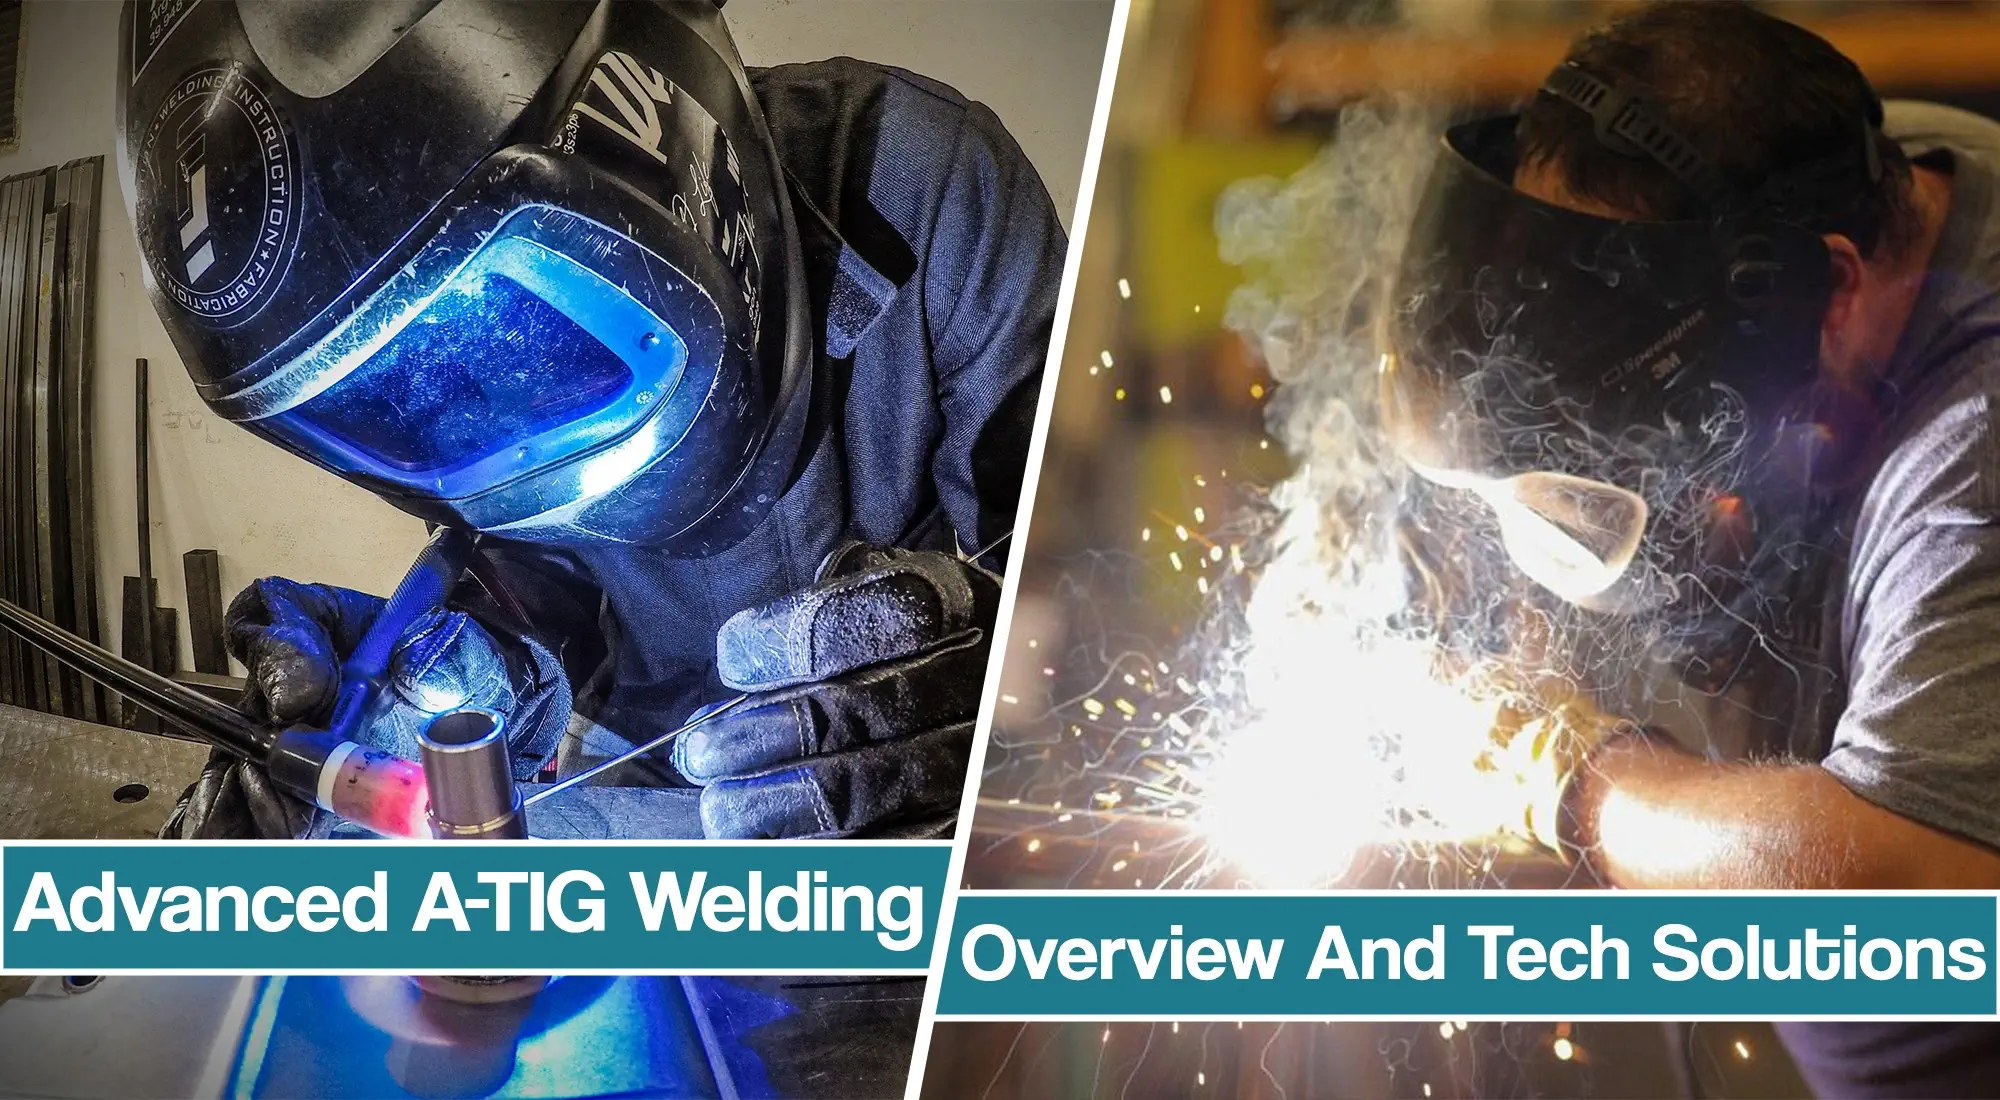 Advanced A-TIG Welding – Overview and Technological Solutions